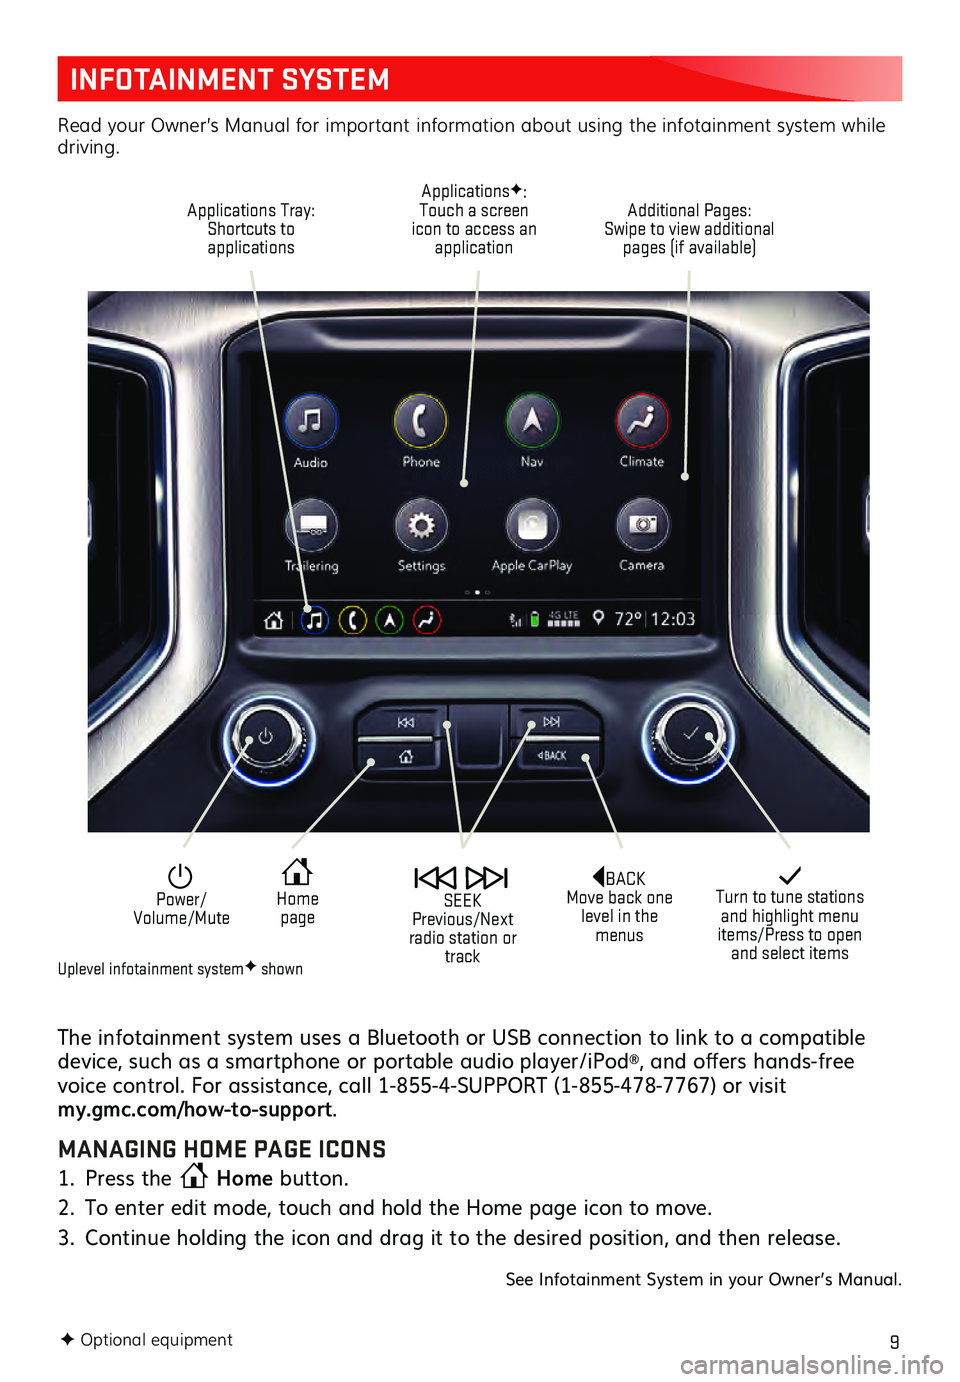 GMC SIERRA 2021  Get To Know Guide 9
INFOTAINMENT SYSTEM
The infotainment system uses a Bluetooth or USB connection to link to a compatible 
device, such as a smartphone or portable audio player/iPod®, and offers hands-free 
voice con